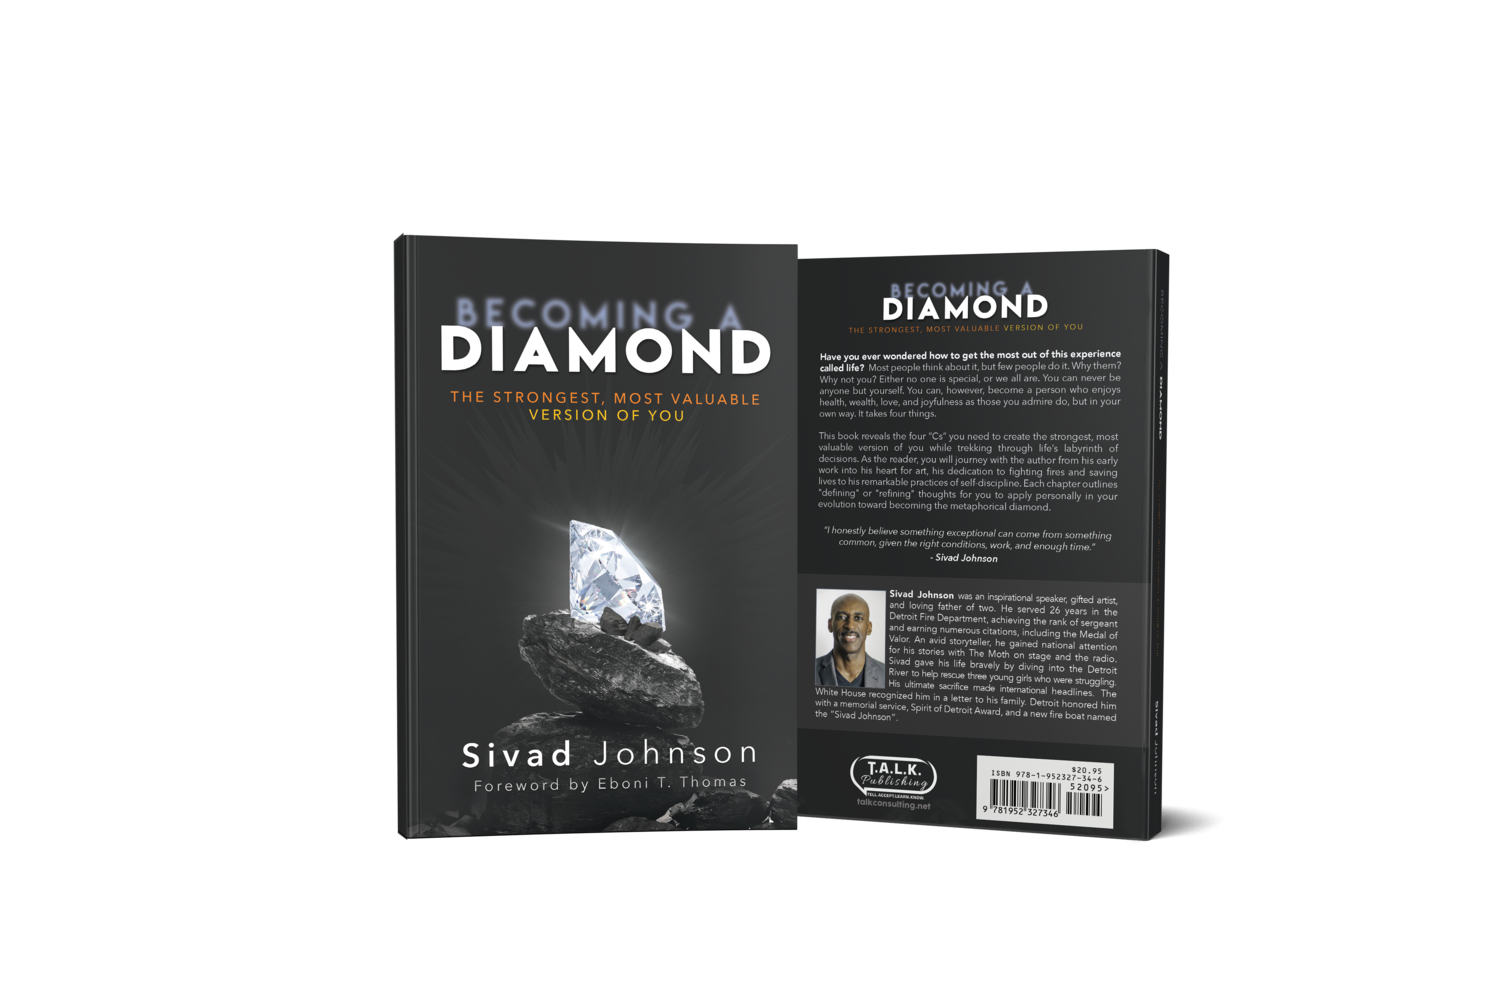 BECOMING A DIAMOND: The Strongest, Most Valuable Version of You